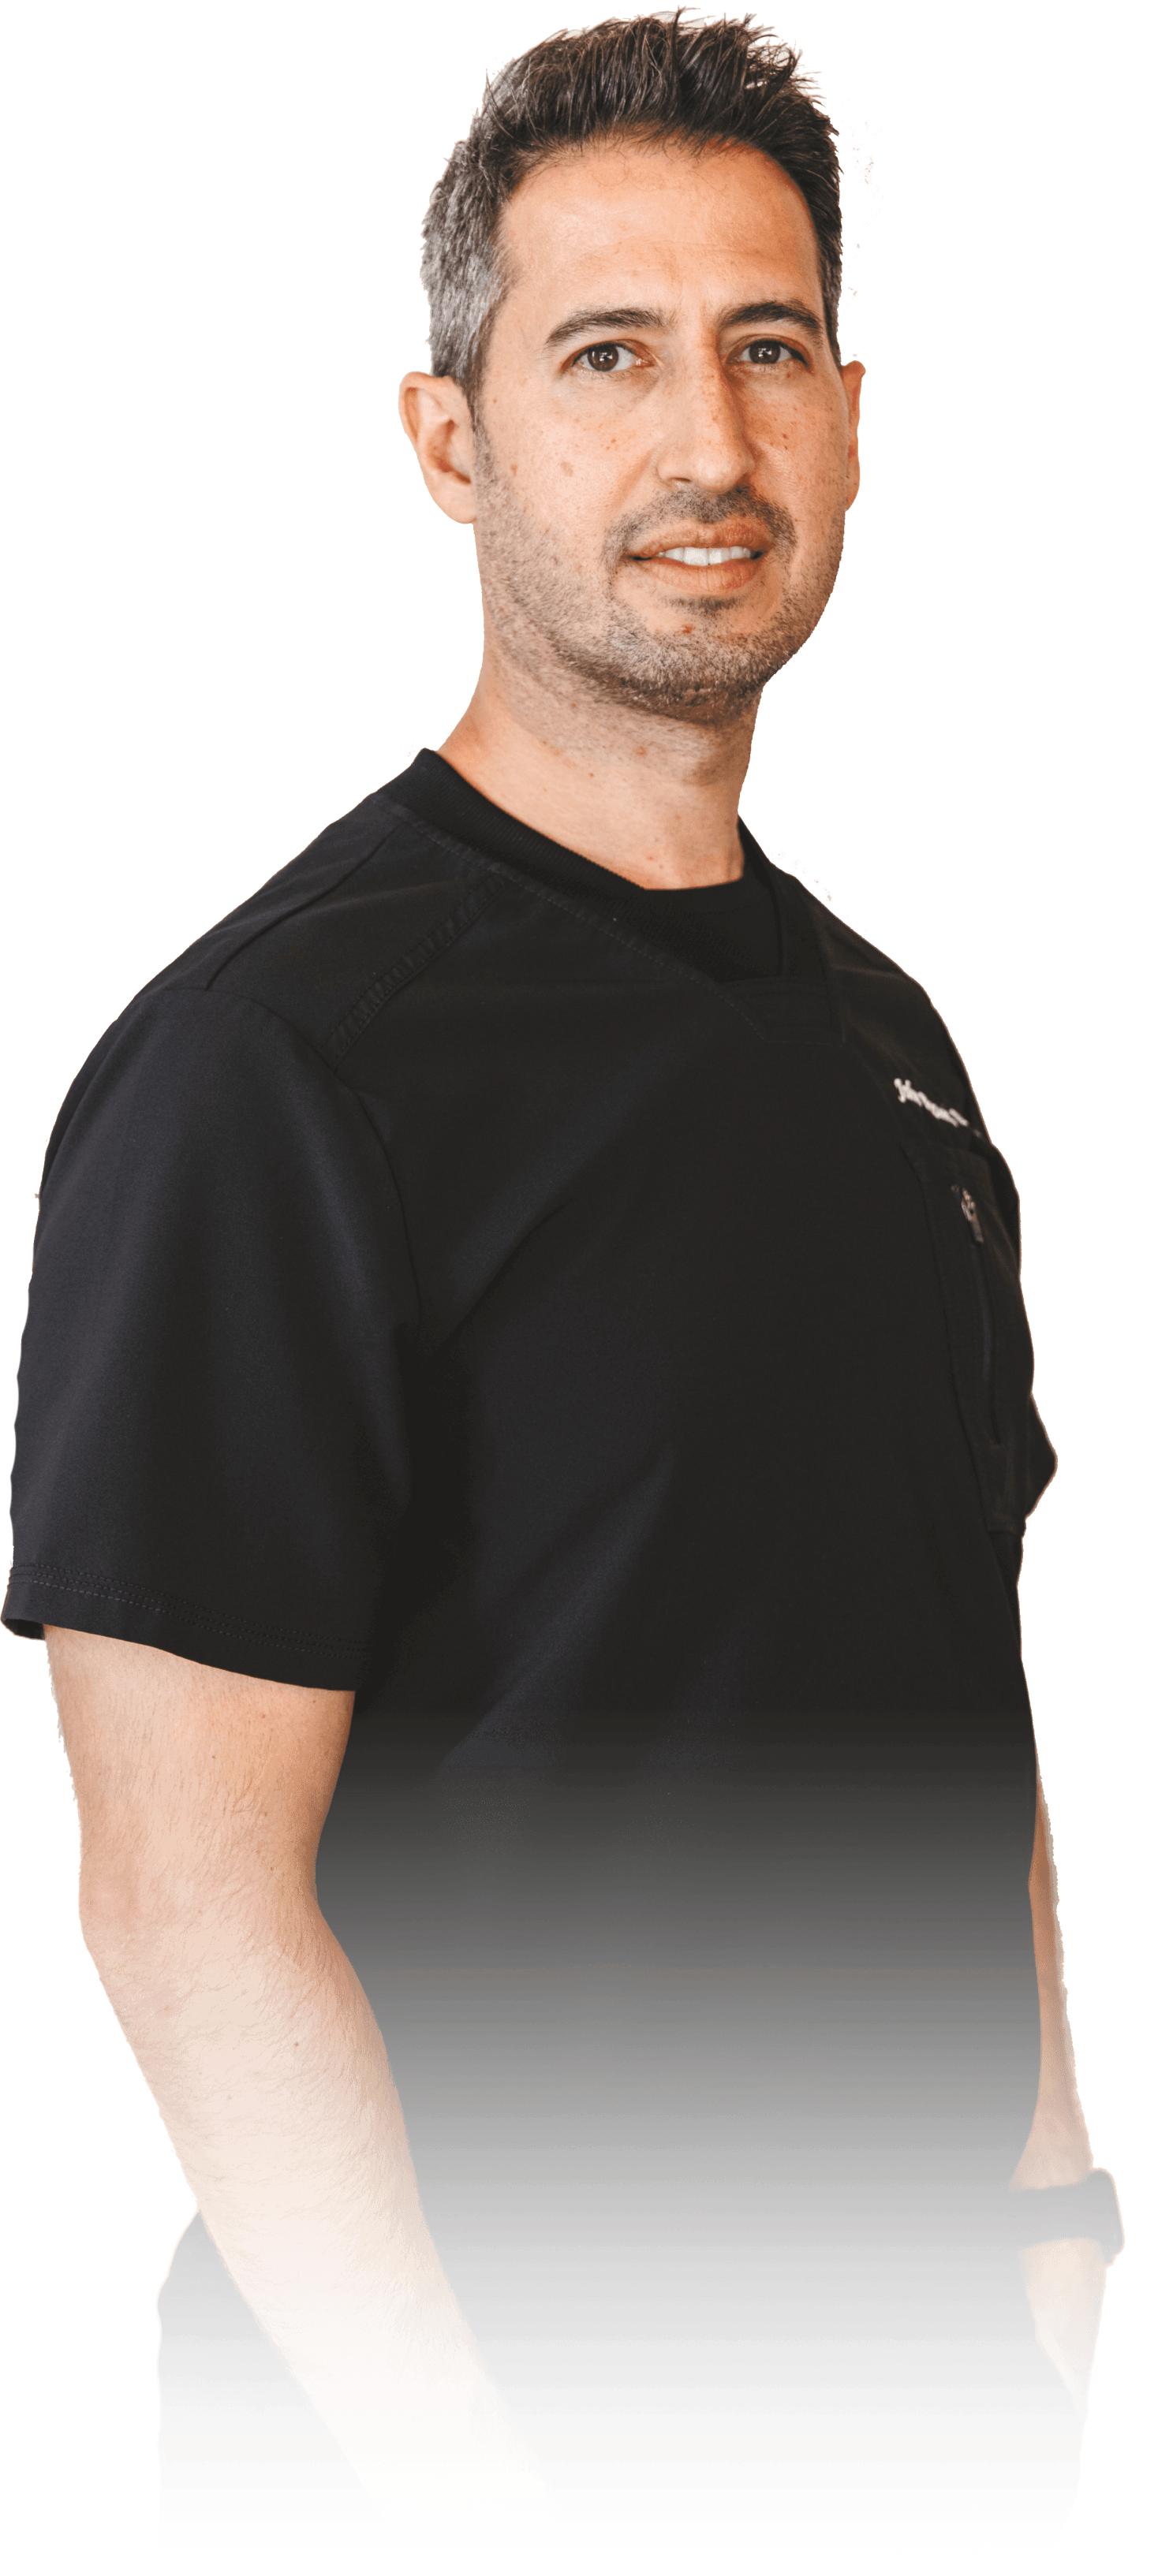 A man in a black shirt is standing in front of a white background.